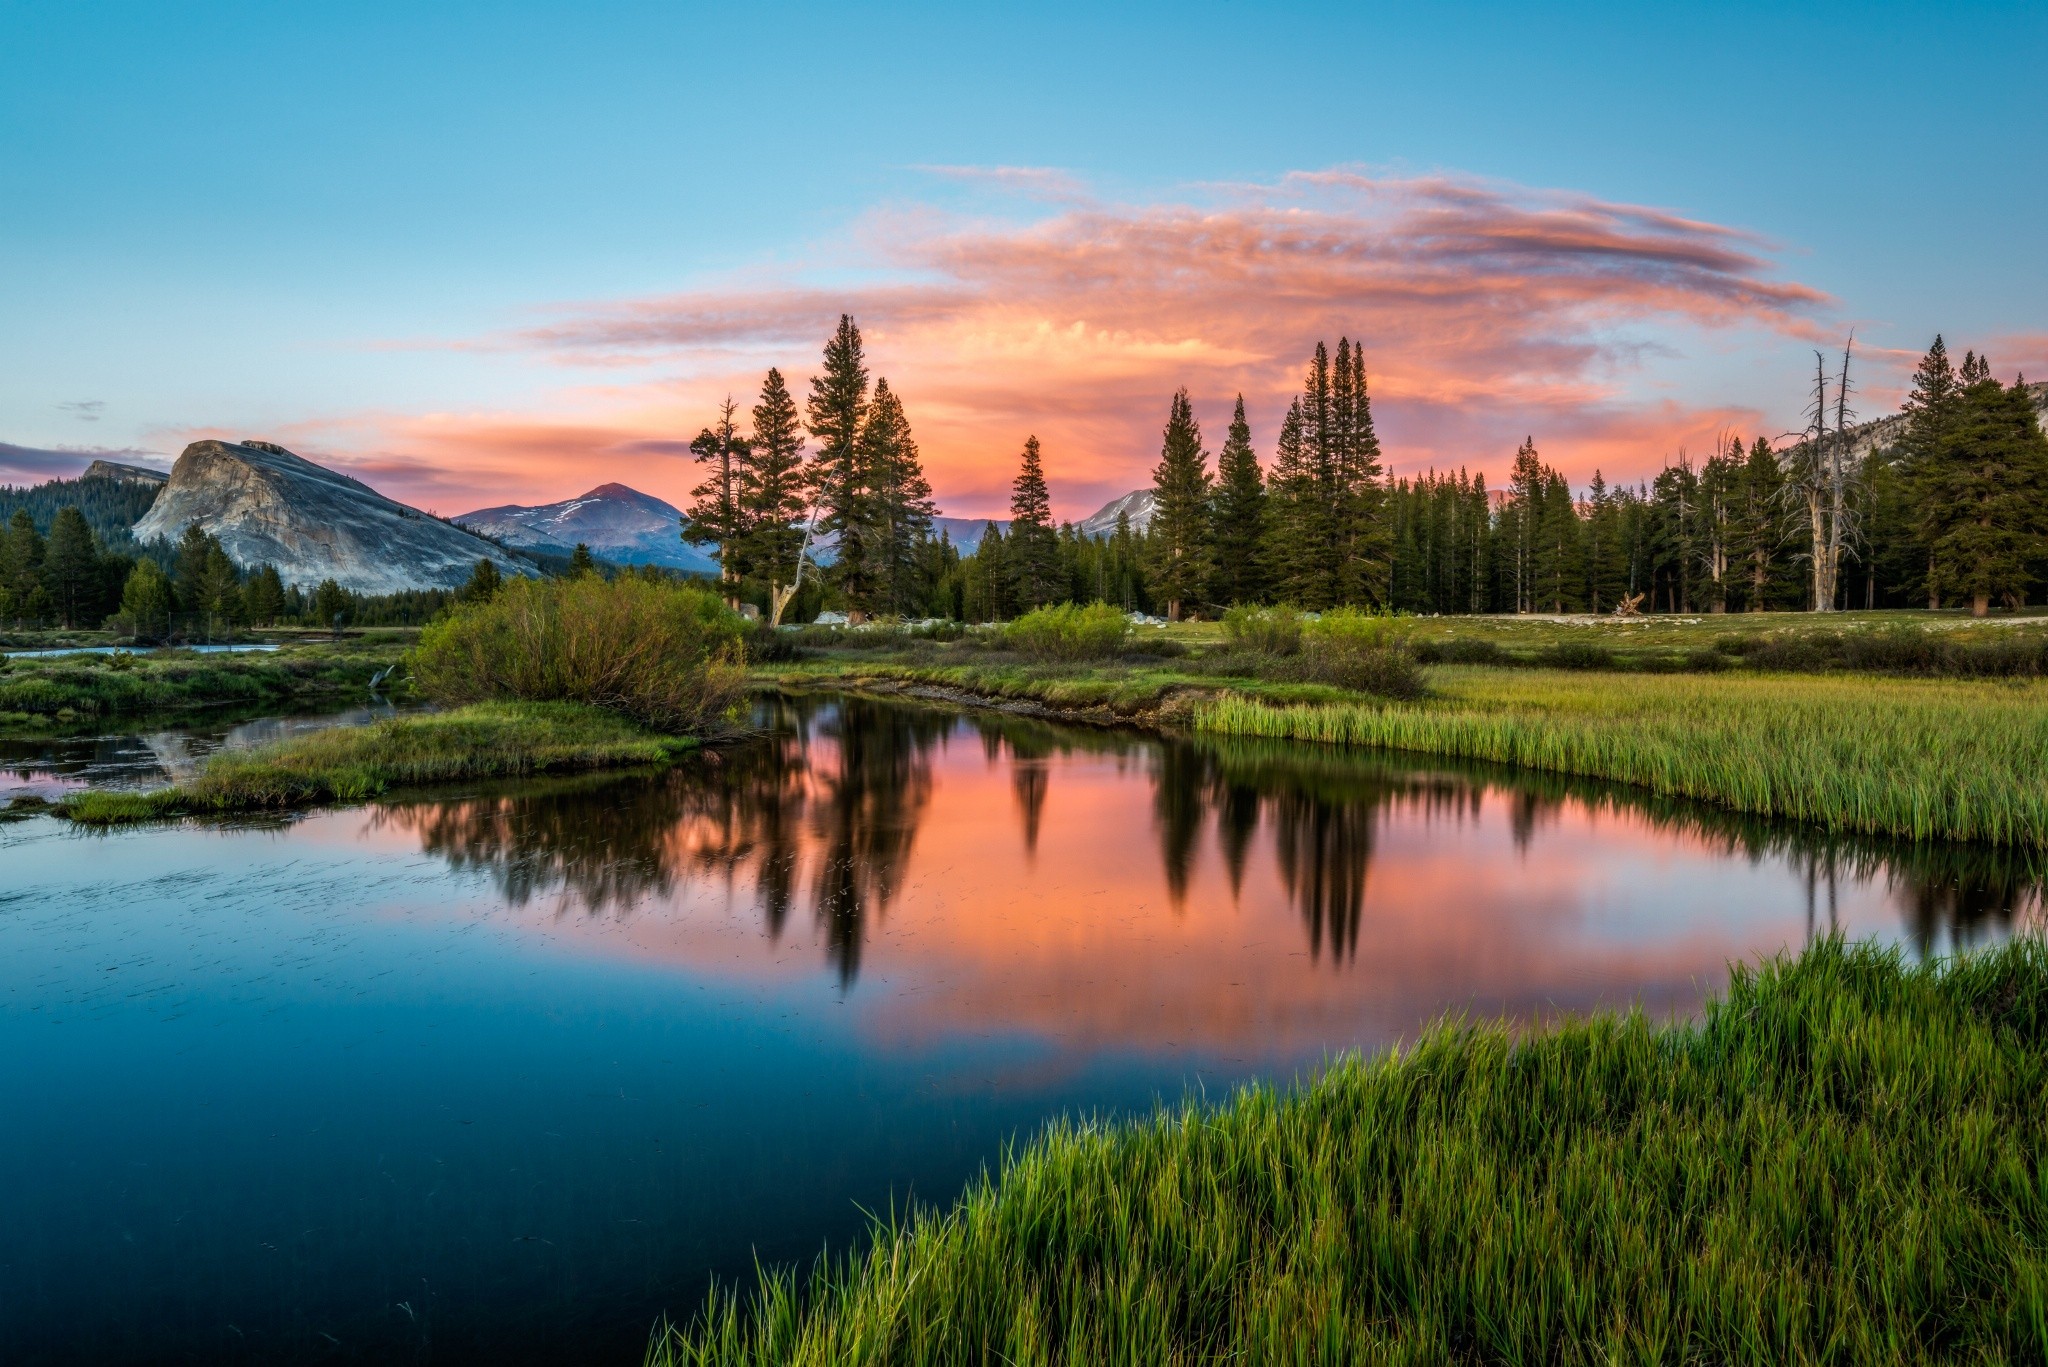 General 2048x1367 landscape nature sunset river forest mountains water clouds grass blue green pink trees reflection Linux